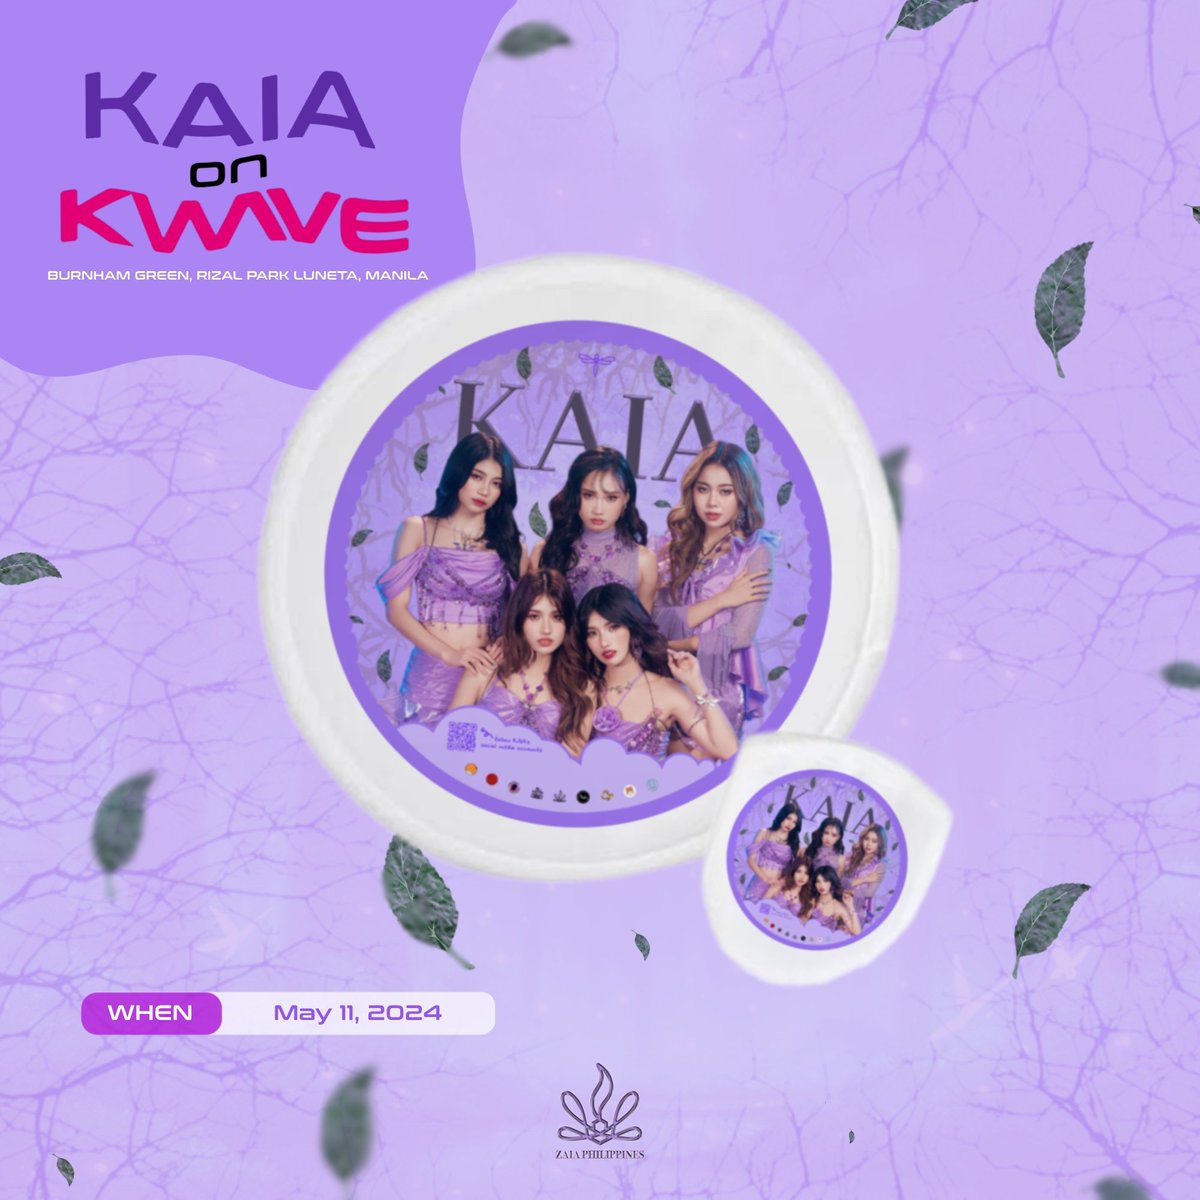 It’s KWAVE D-day! Hi ZAIA! We’ll be giving away KAIA round fans at the event later. Please take care and stay hydrated! See you there ❣️ #KWAVEwithKAIA #KWAVEMusicFestival #KAIA @KAIAOfficialPH